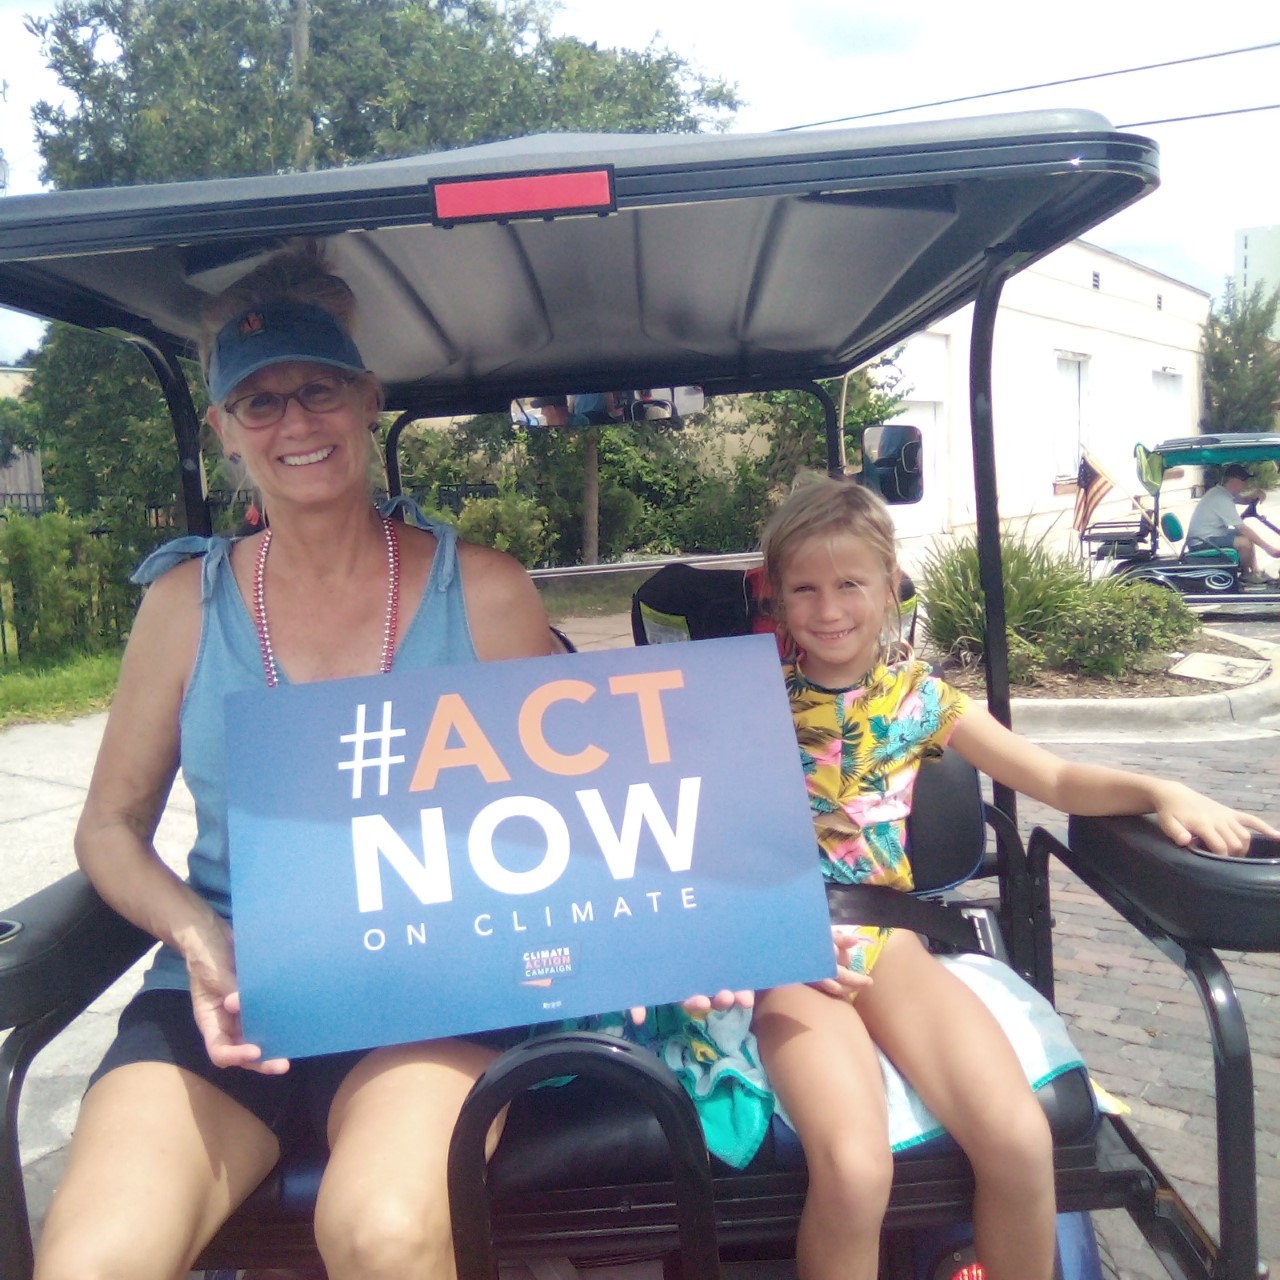 Golf cart parade for climate action in Orlando